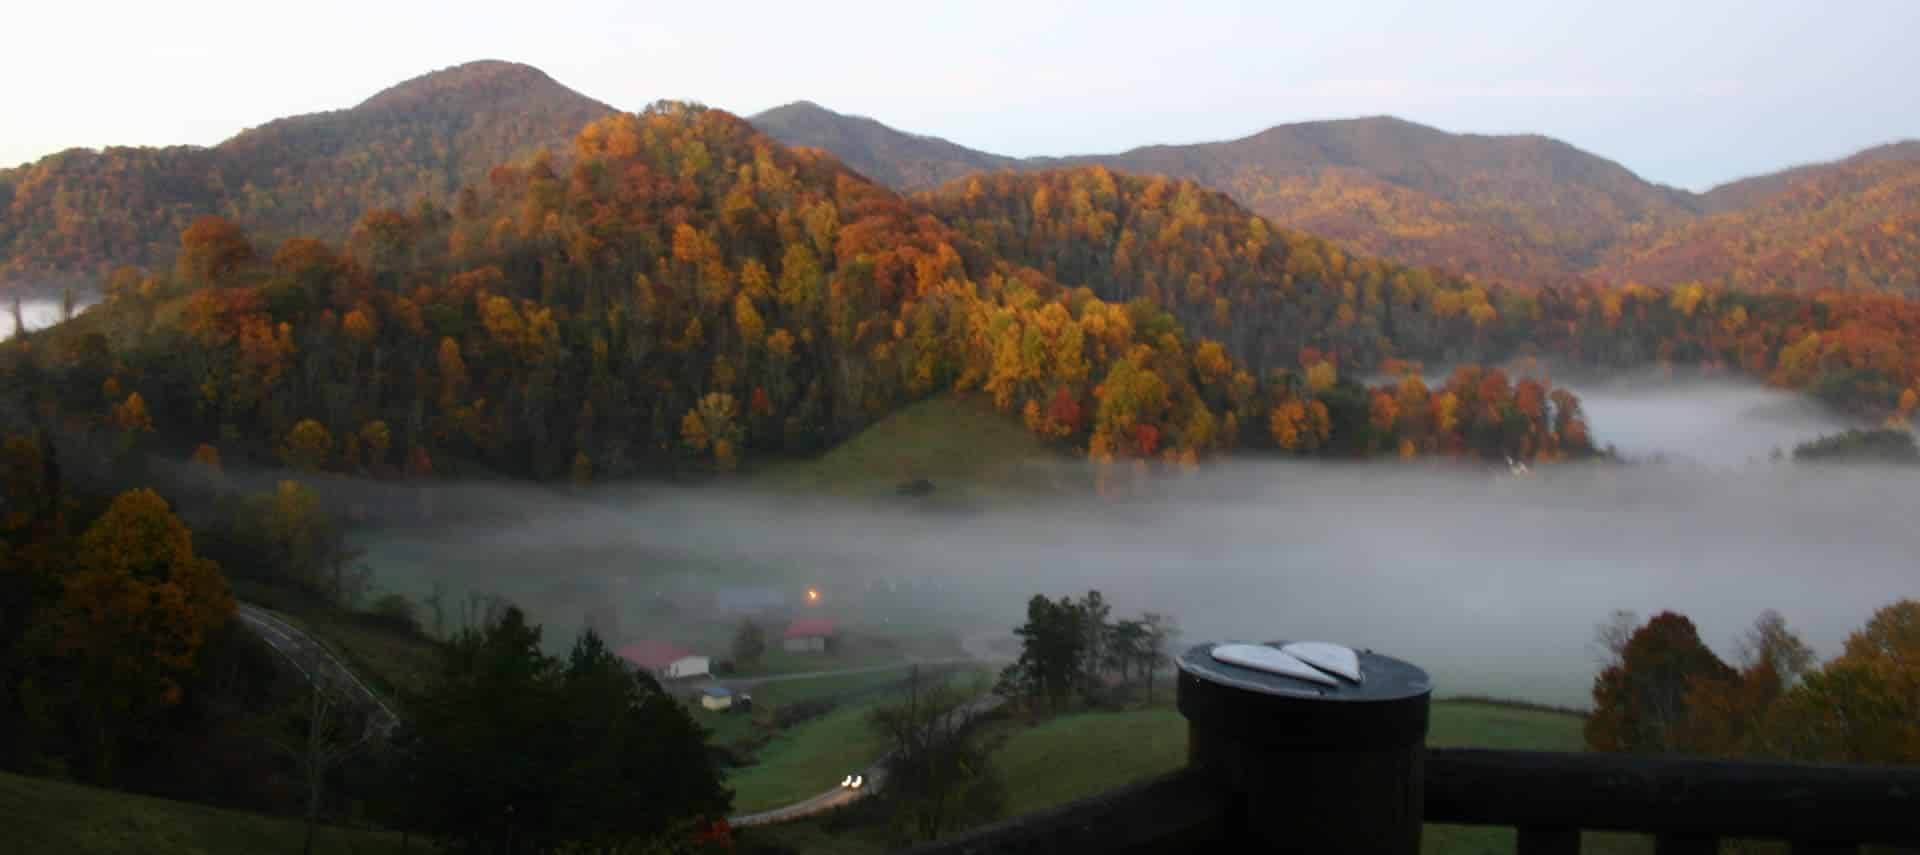 Mountain valley covered by mist, surrounded by trees and hills bursting with fall foliage. 